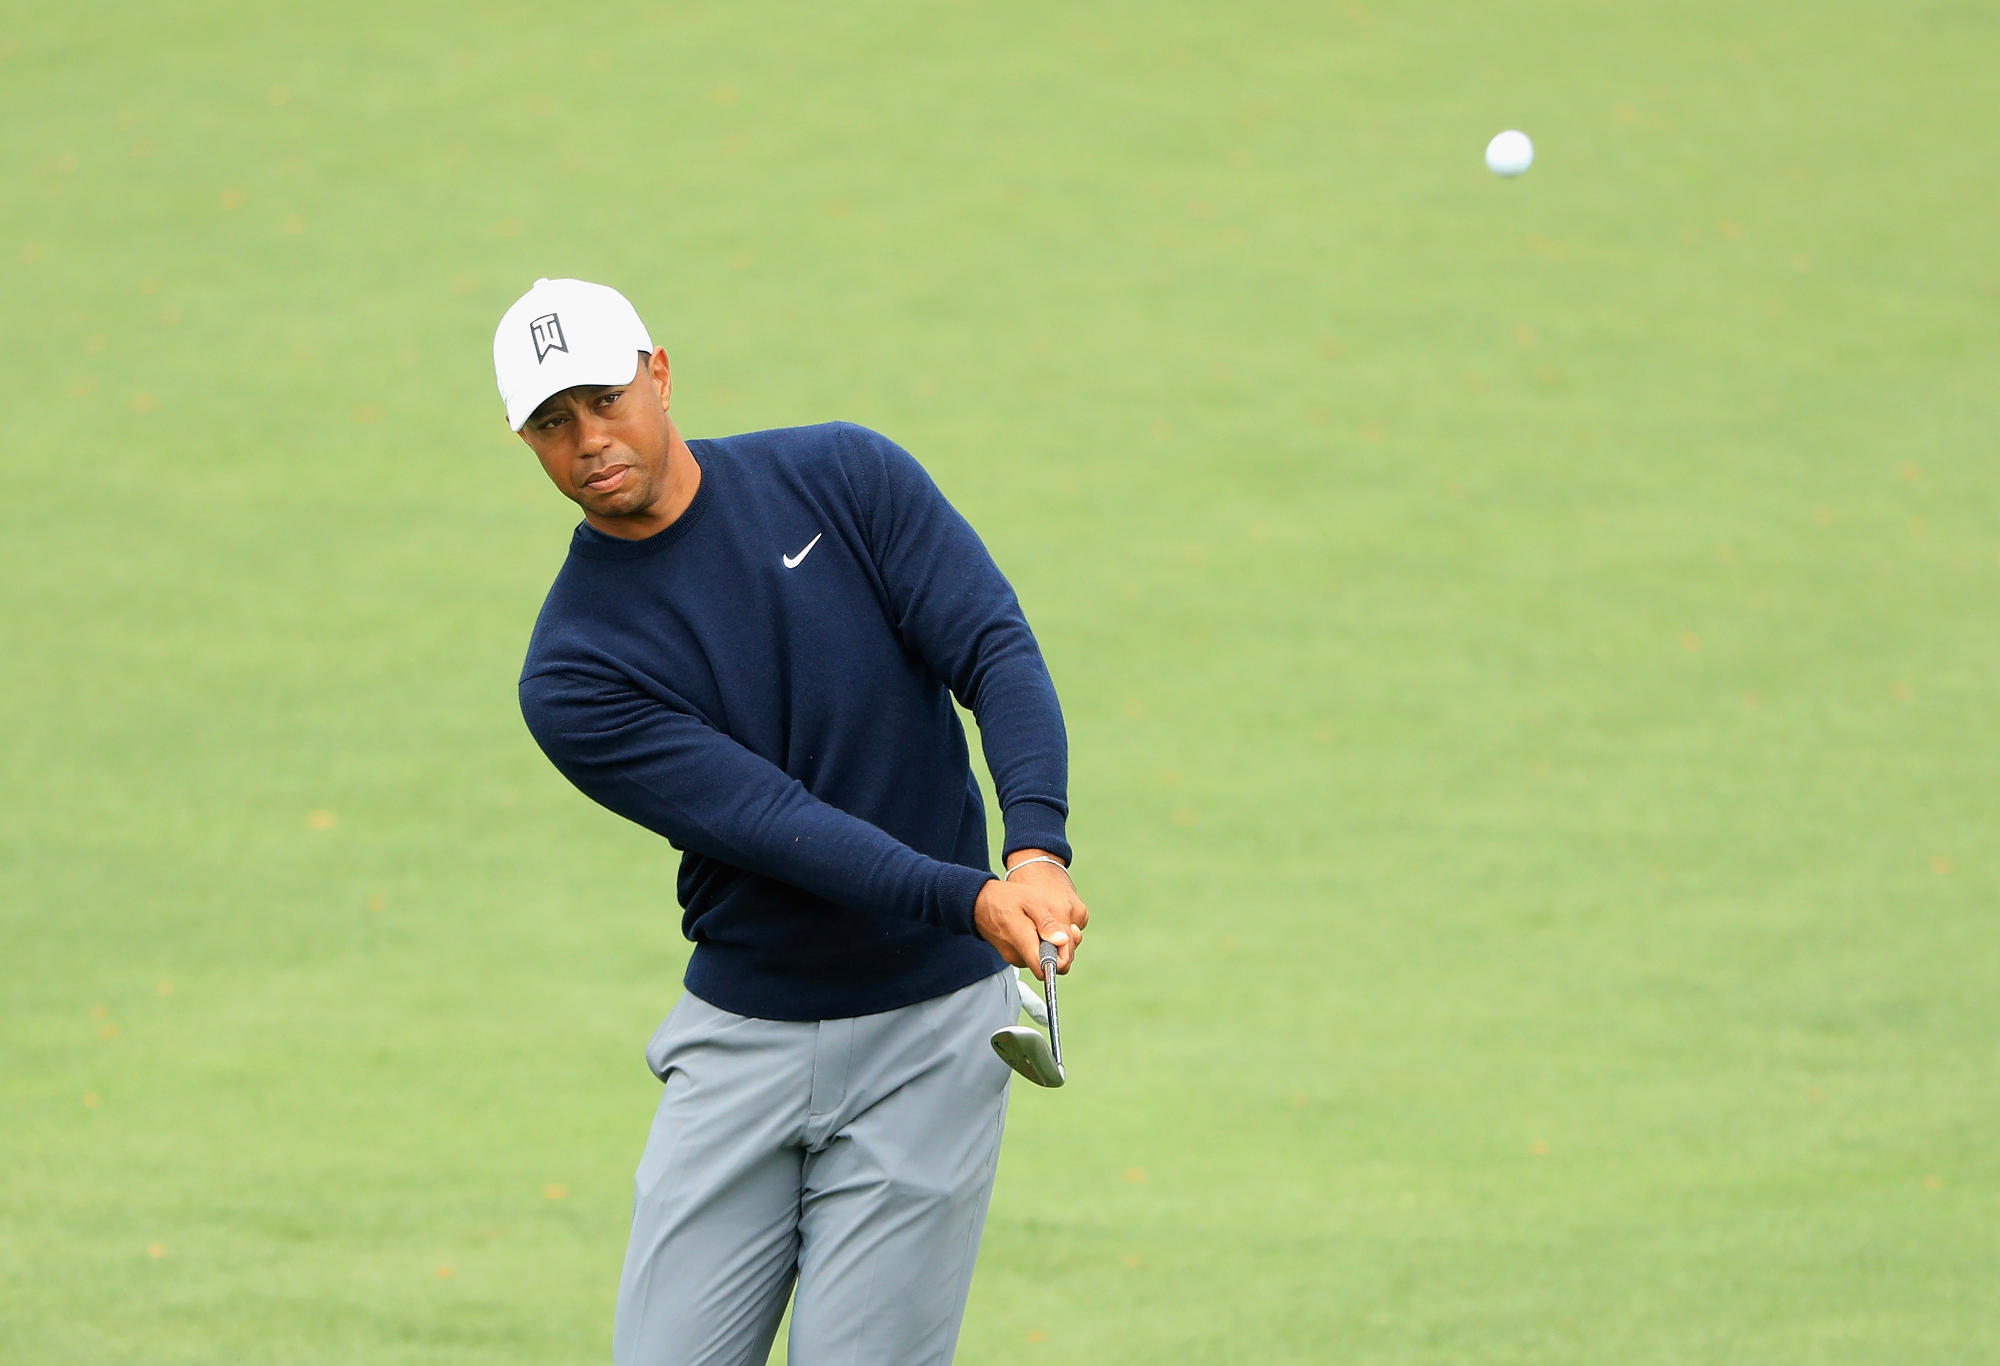 Tiger Woods of the United States plays a shot on the second hole during a practice round prior to the start of the 2018 Masters Tournament at Augusta National Golf Club on April 4, 2018 in Augusta, Georgia.